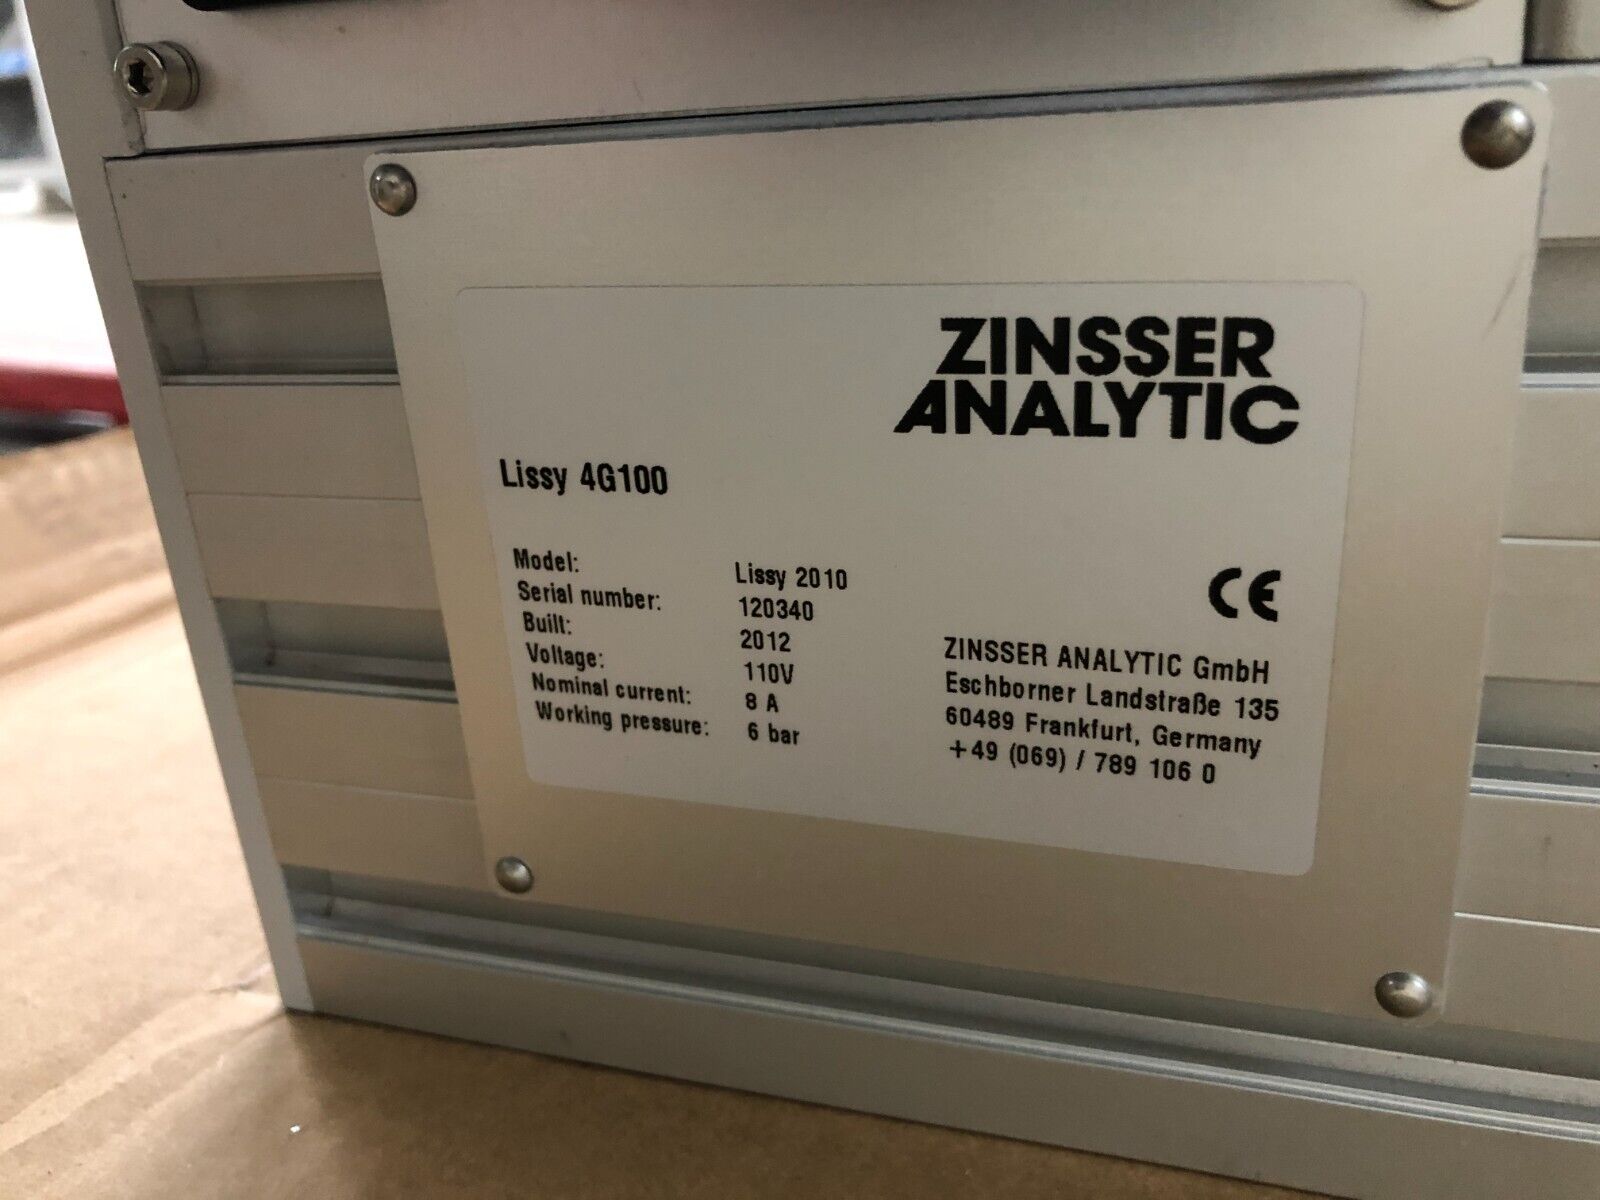 Zinsser Analytic Speedy Automated Solid Phase Extraction System Lissy 2010 4G100